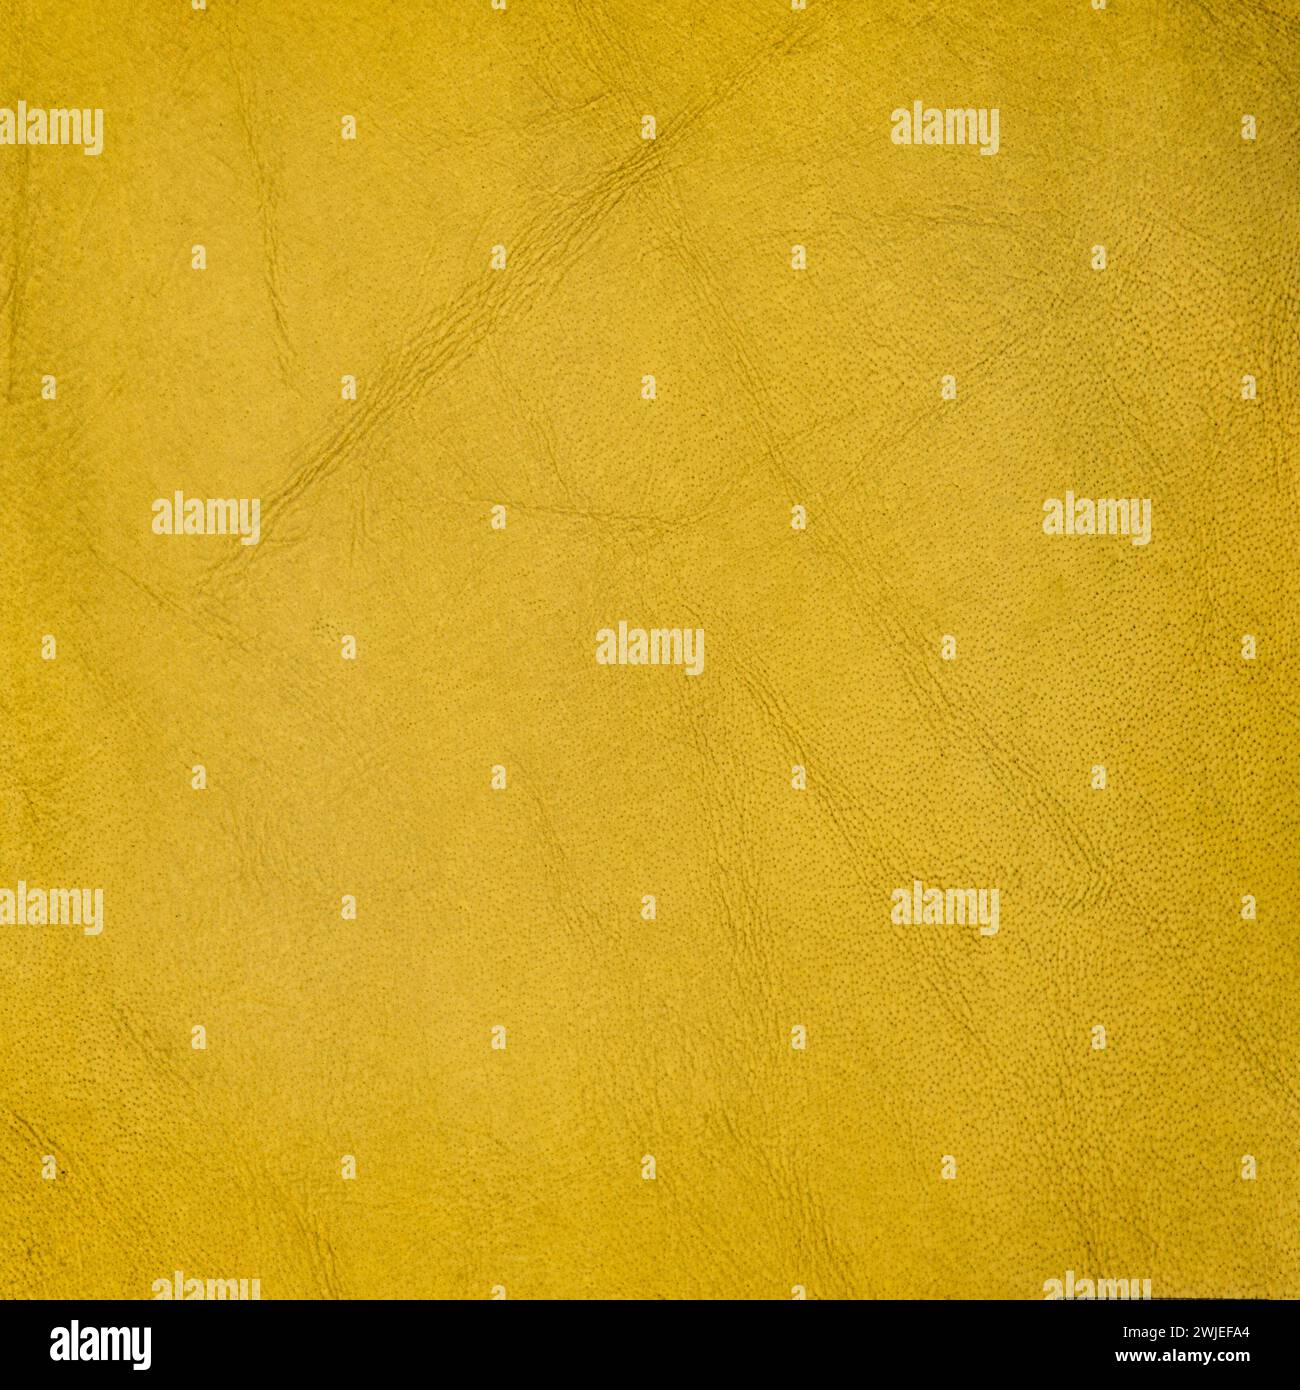 A yellow leather texture background Stock Photo